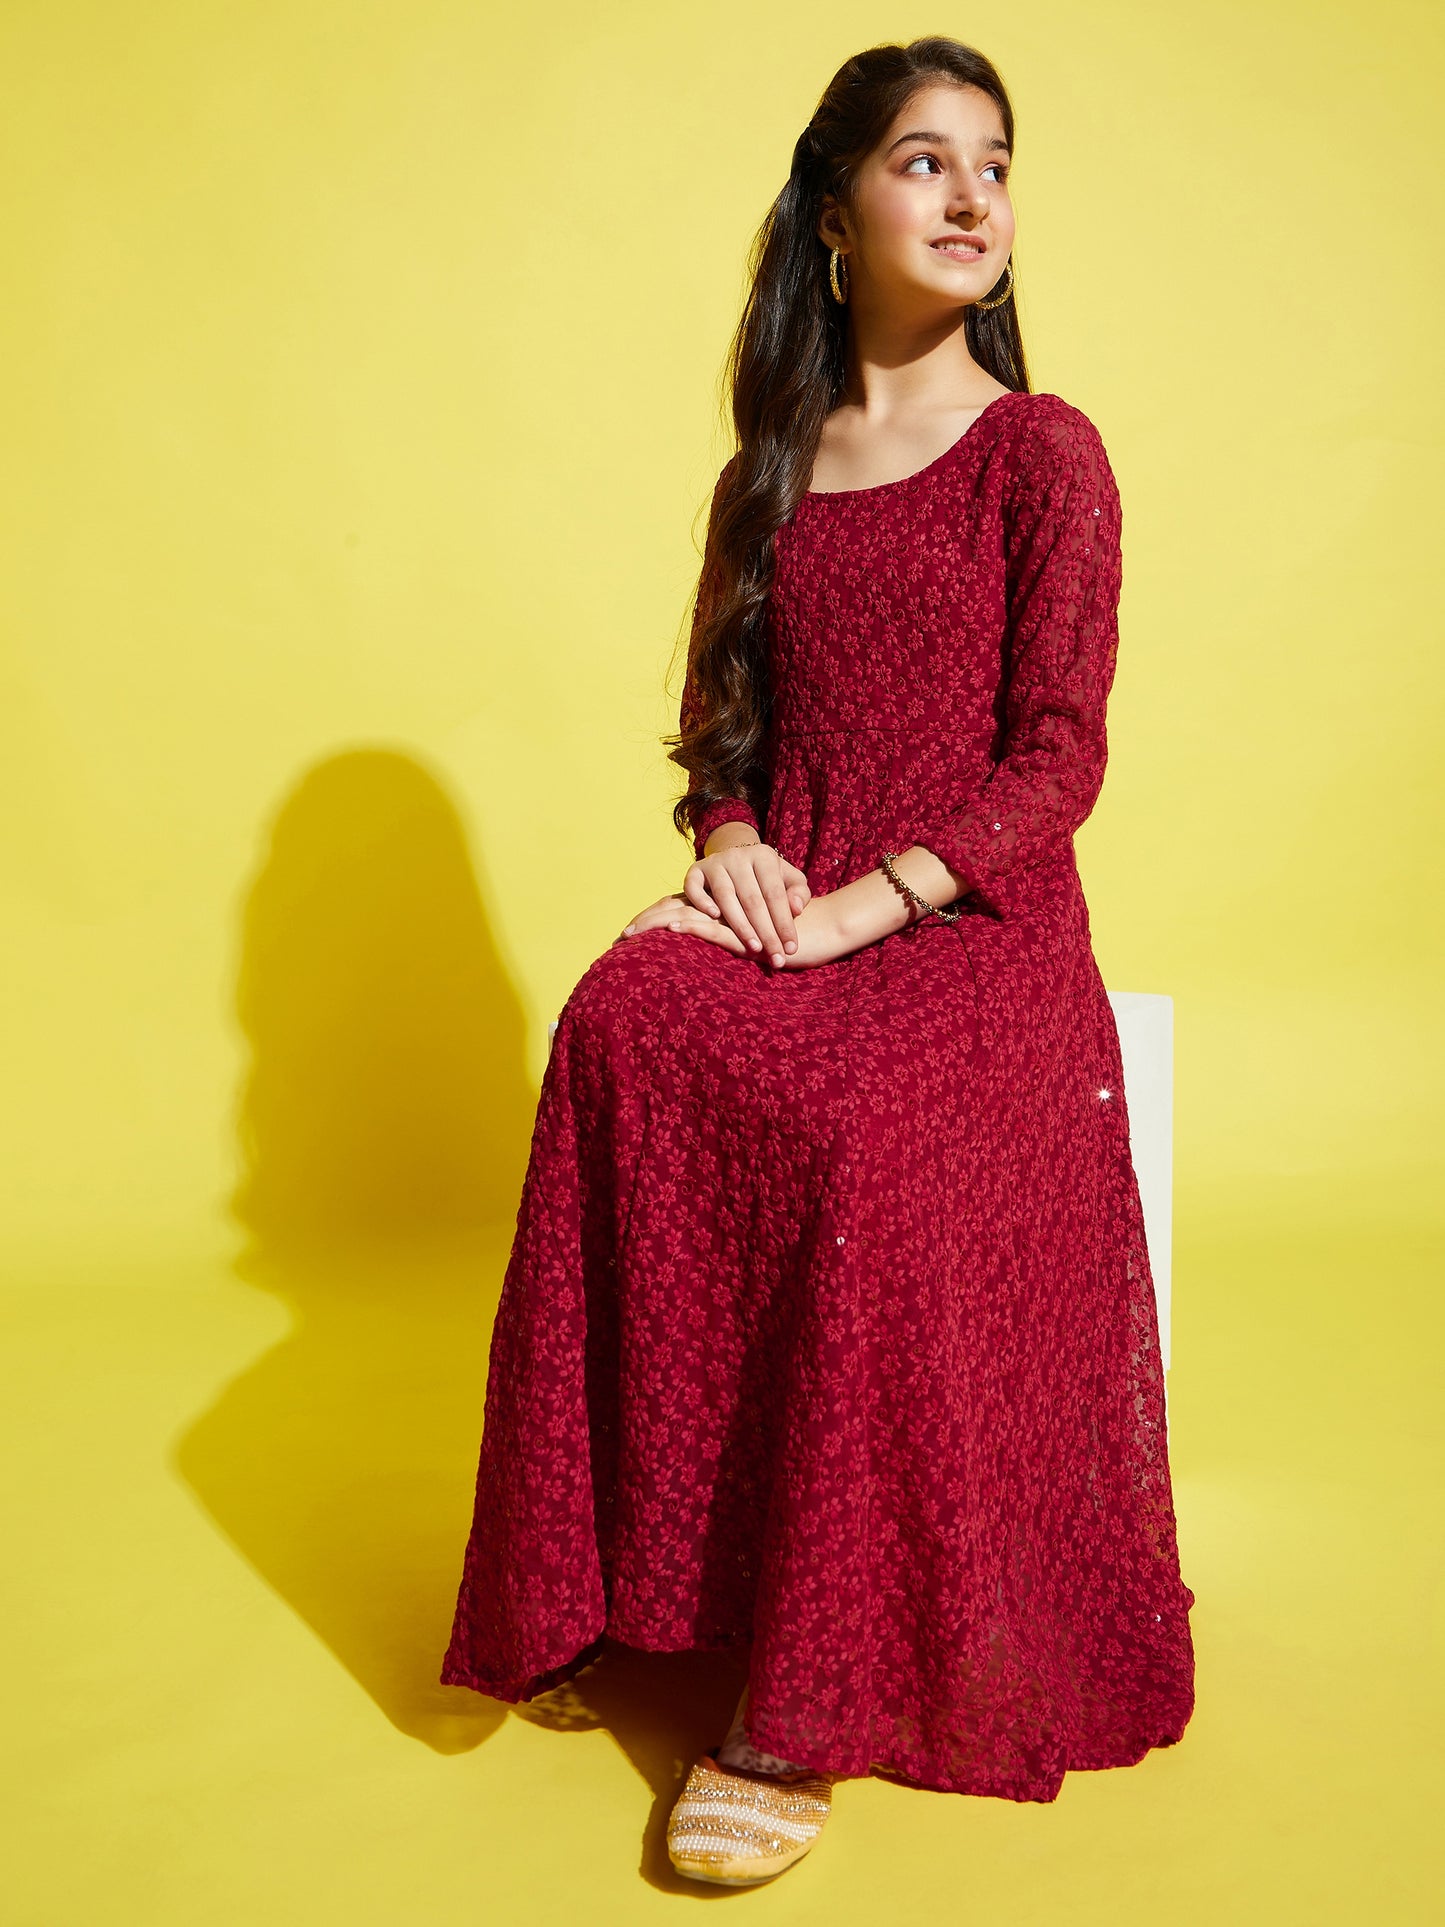 Girls Floral Embroided Maxi Dress - Maroon